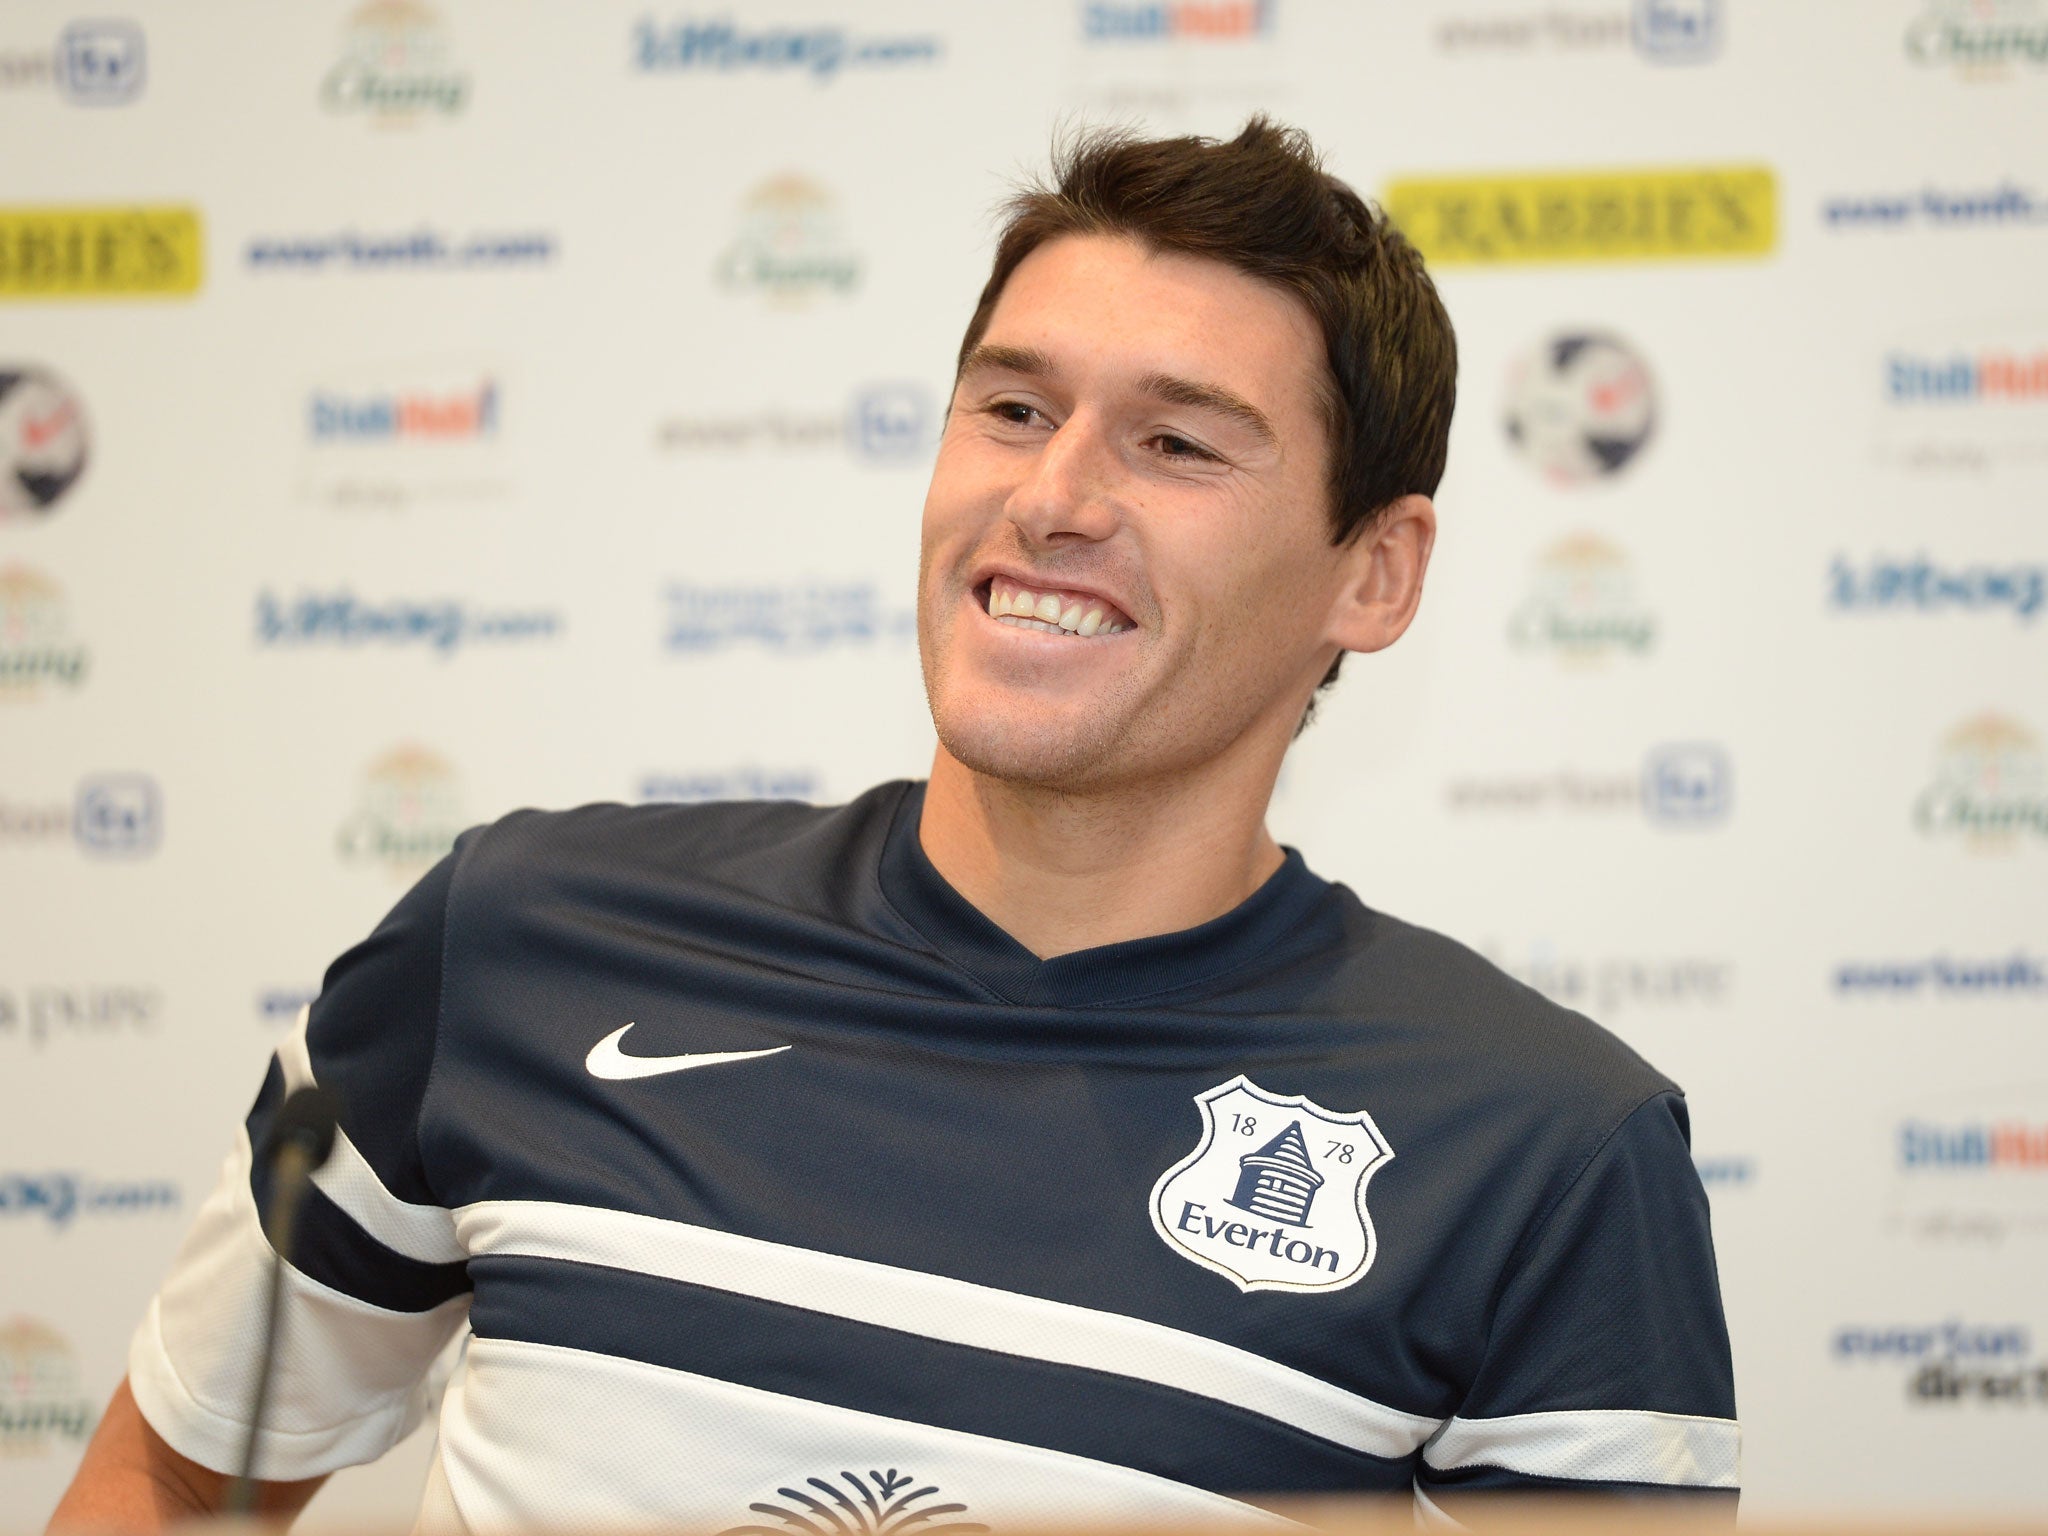 Gareth Barry is already considering extending his stay at Everton after this season's loan